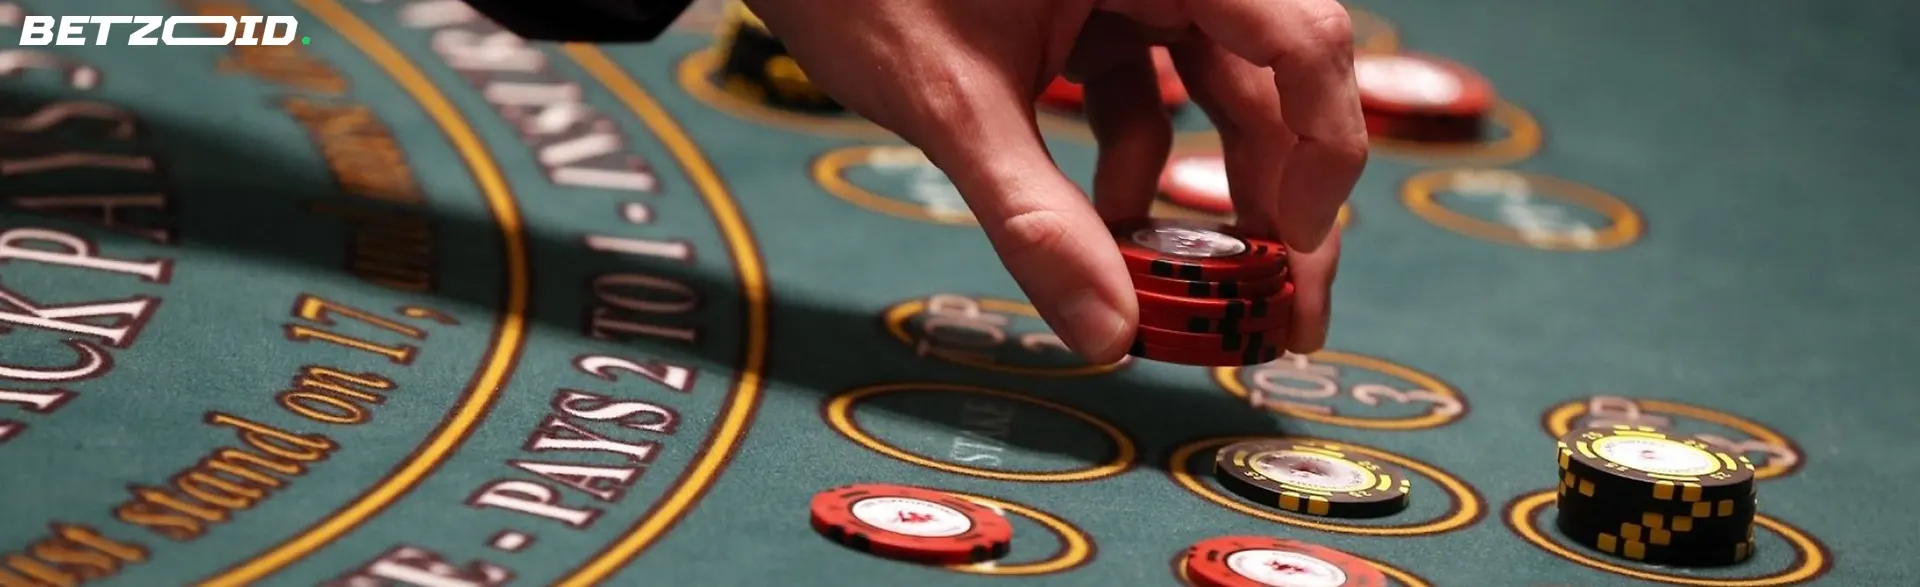 A close-up of a hand placing chips on a green casino table, illustrating the excitement and opportunities at big bonus casino sites in Canada.